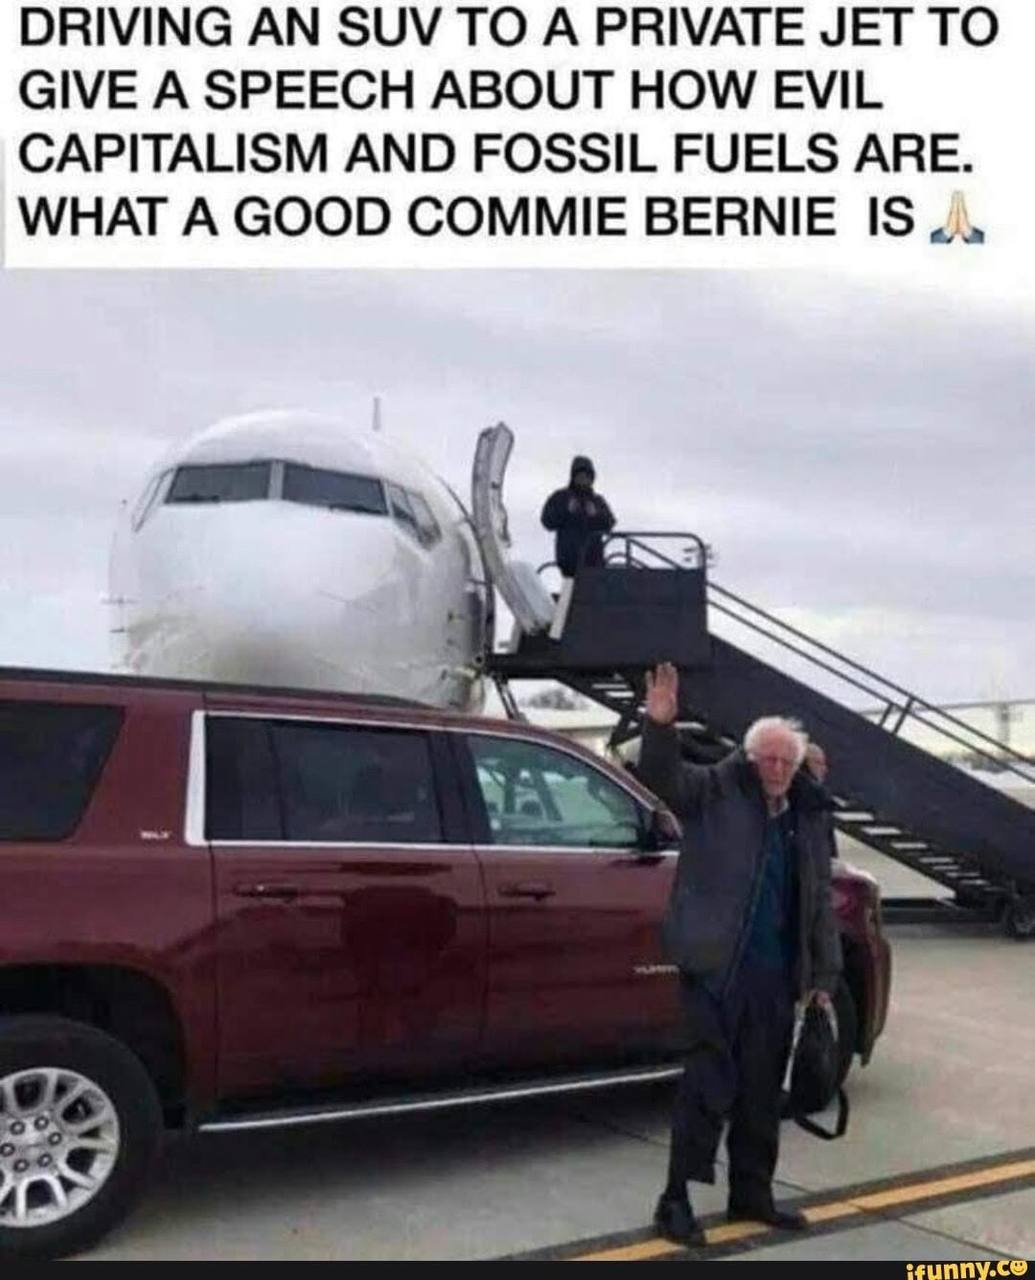 Bernie, driving SUV to a private jet to give a speech on fossil fuels